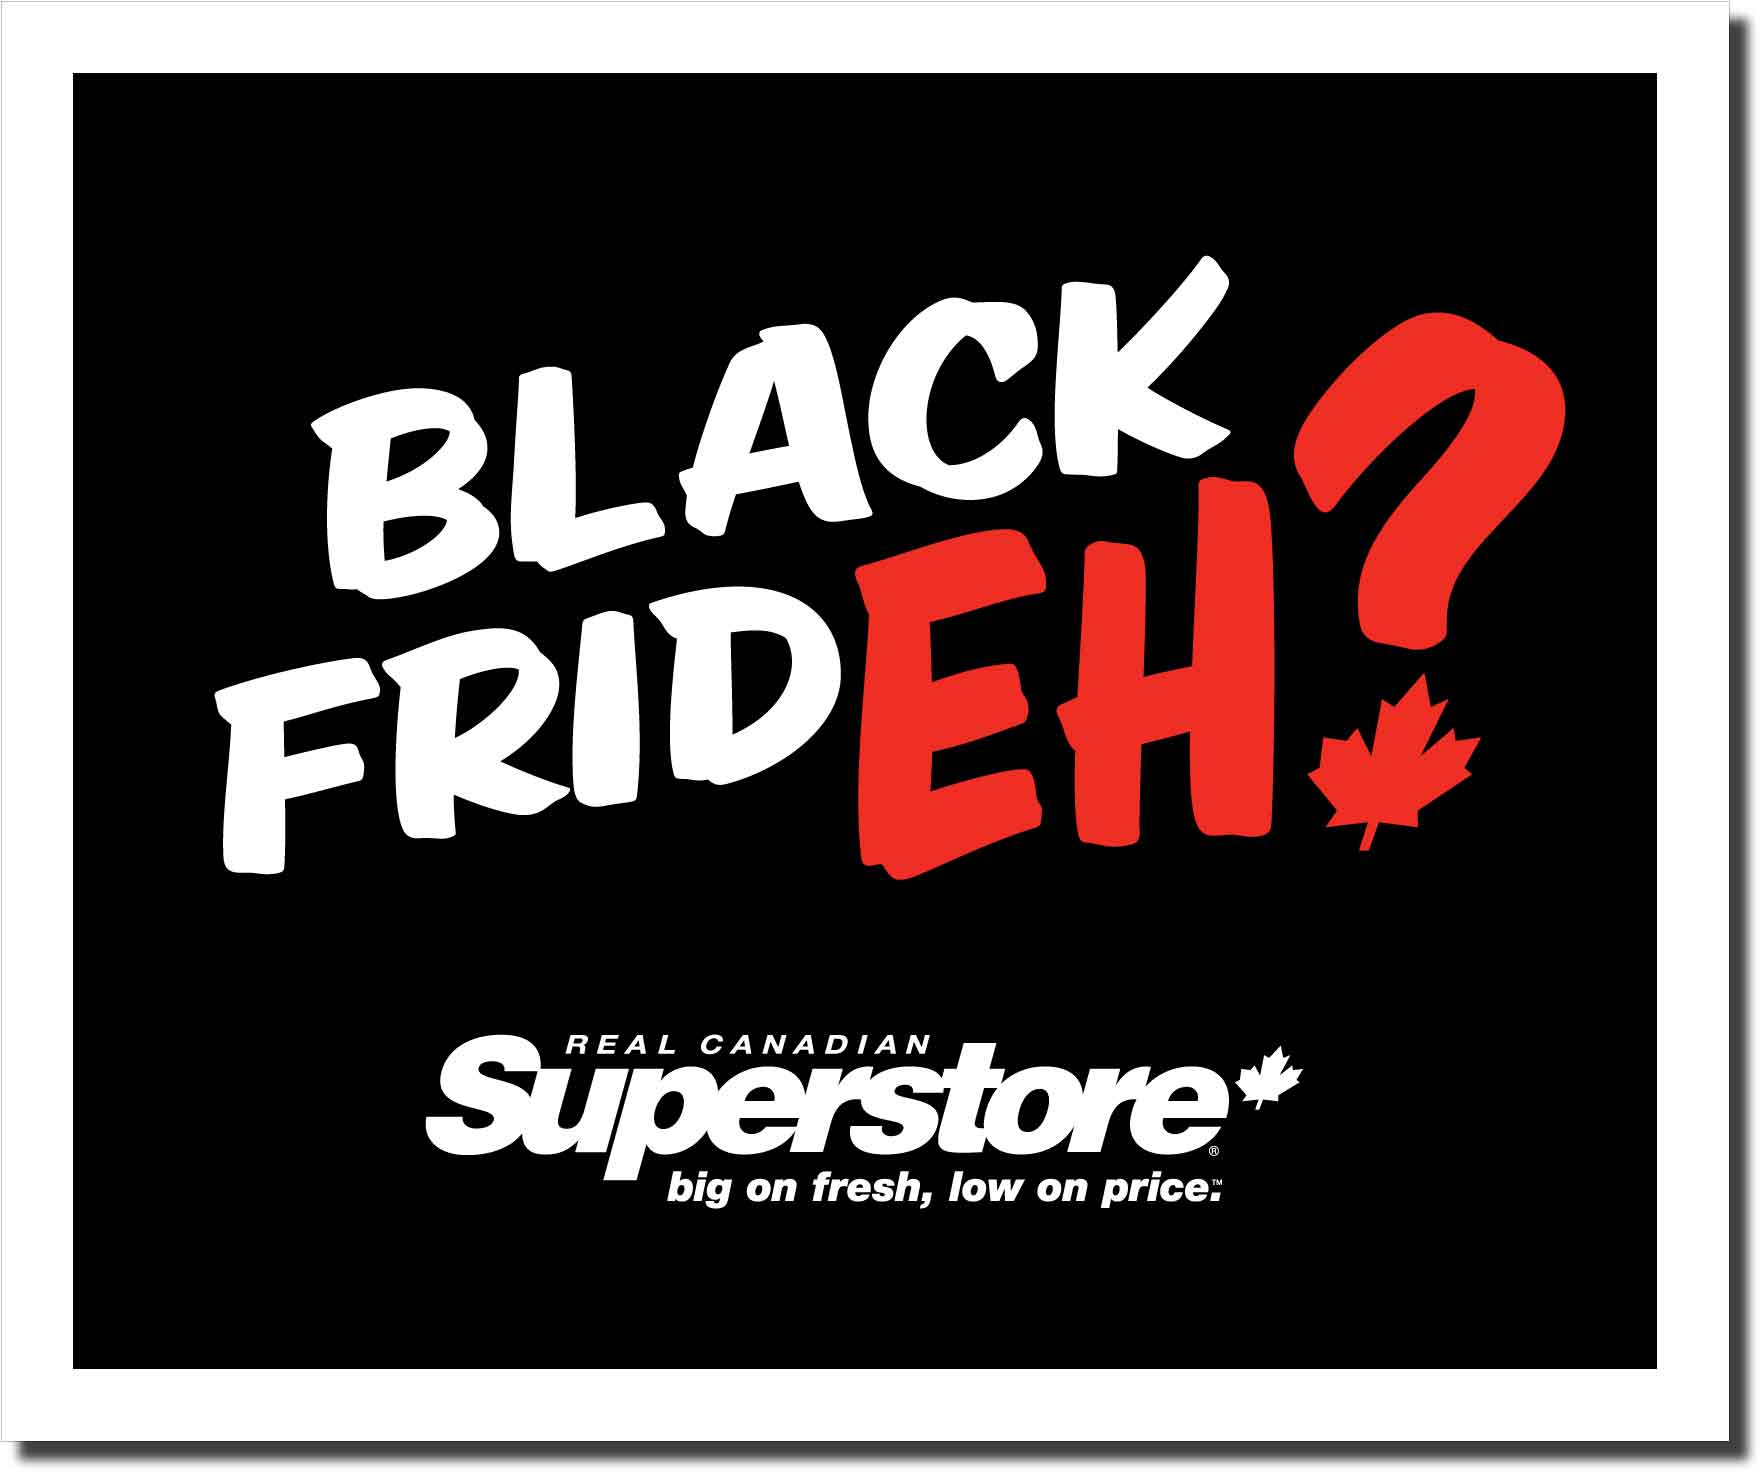 Real Canadian Superstore Black Friday lawn bag signs